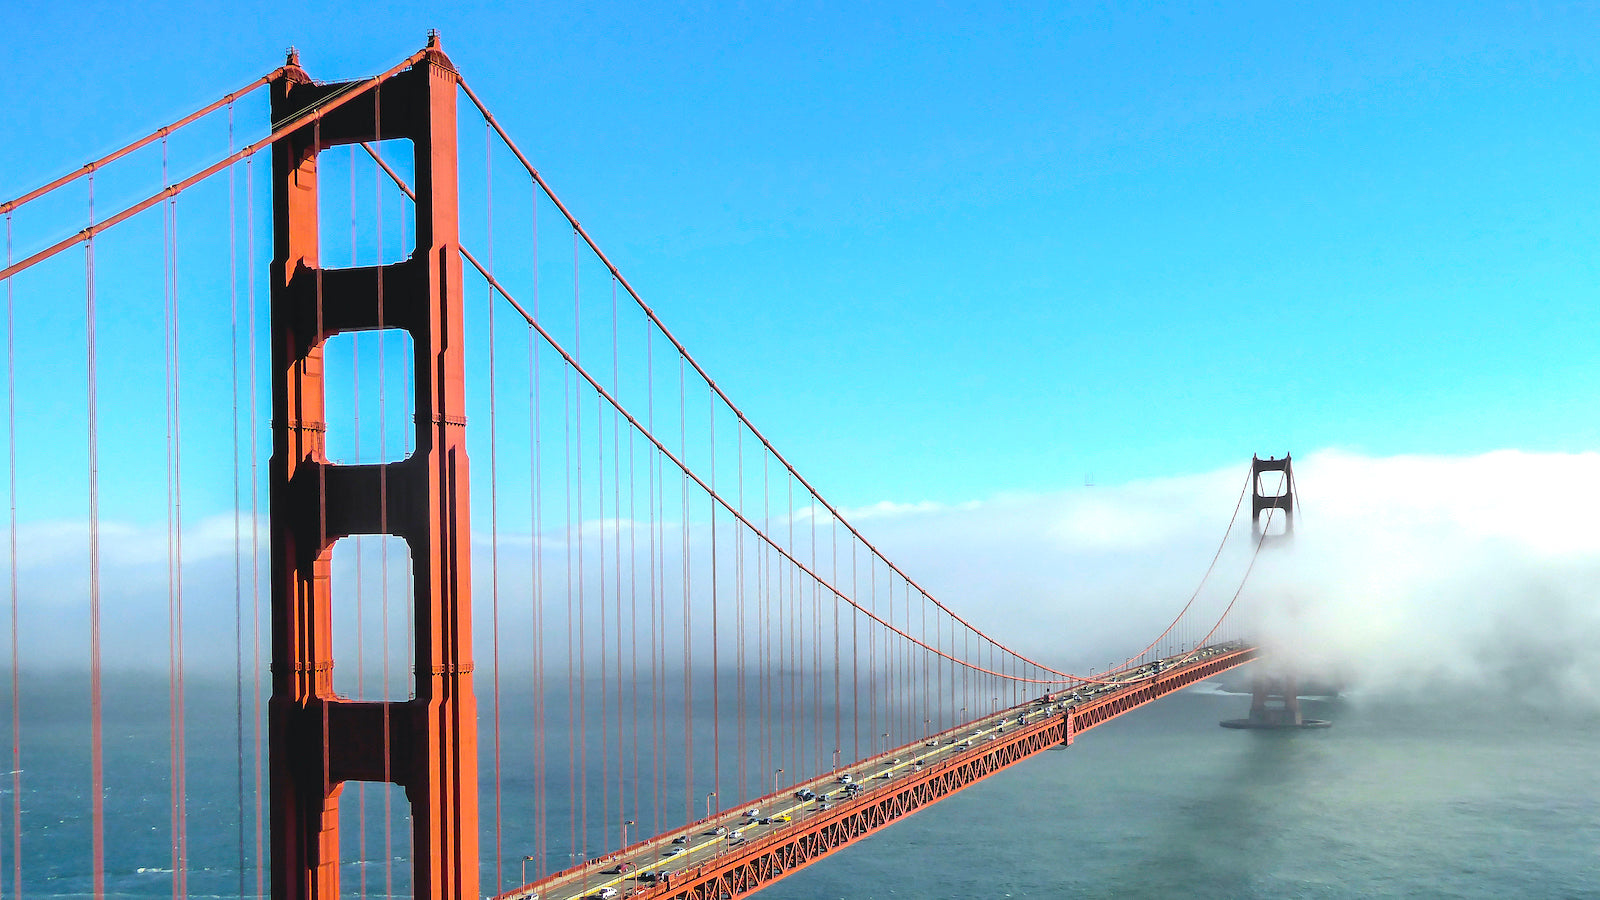 A soaring view of the Golden Gate Bridge on a sunny day, with low fog in the background.